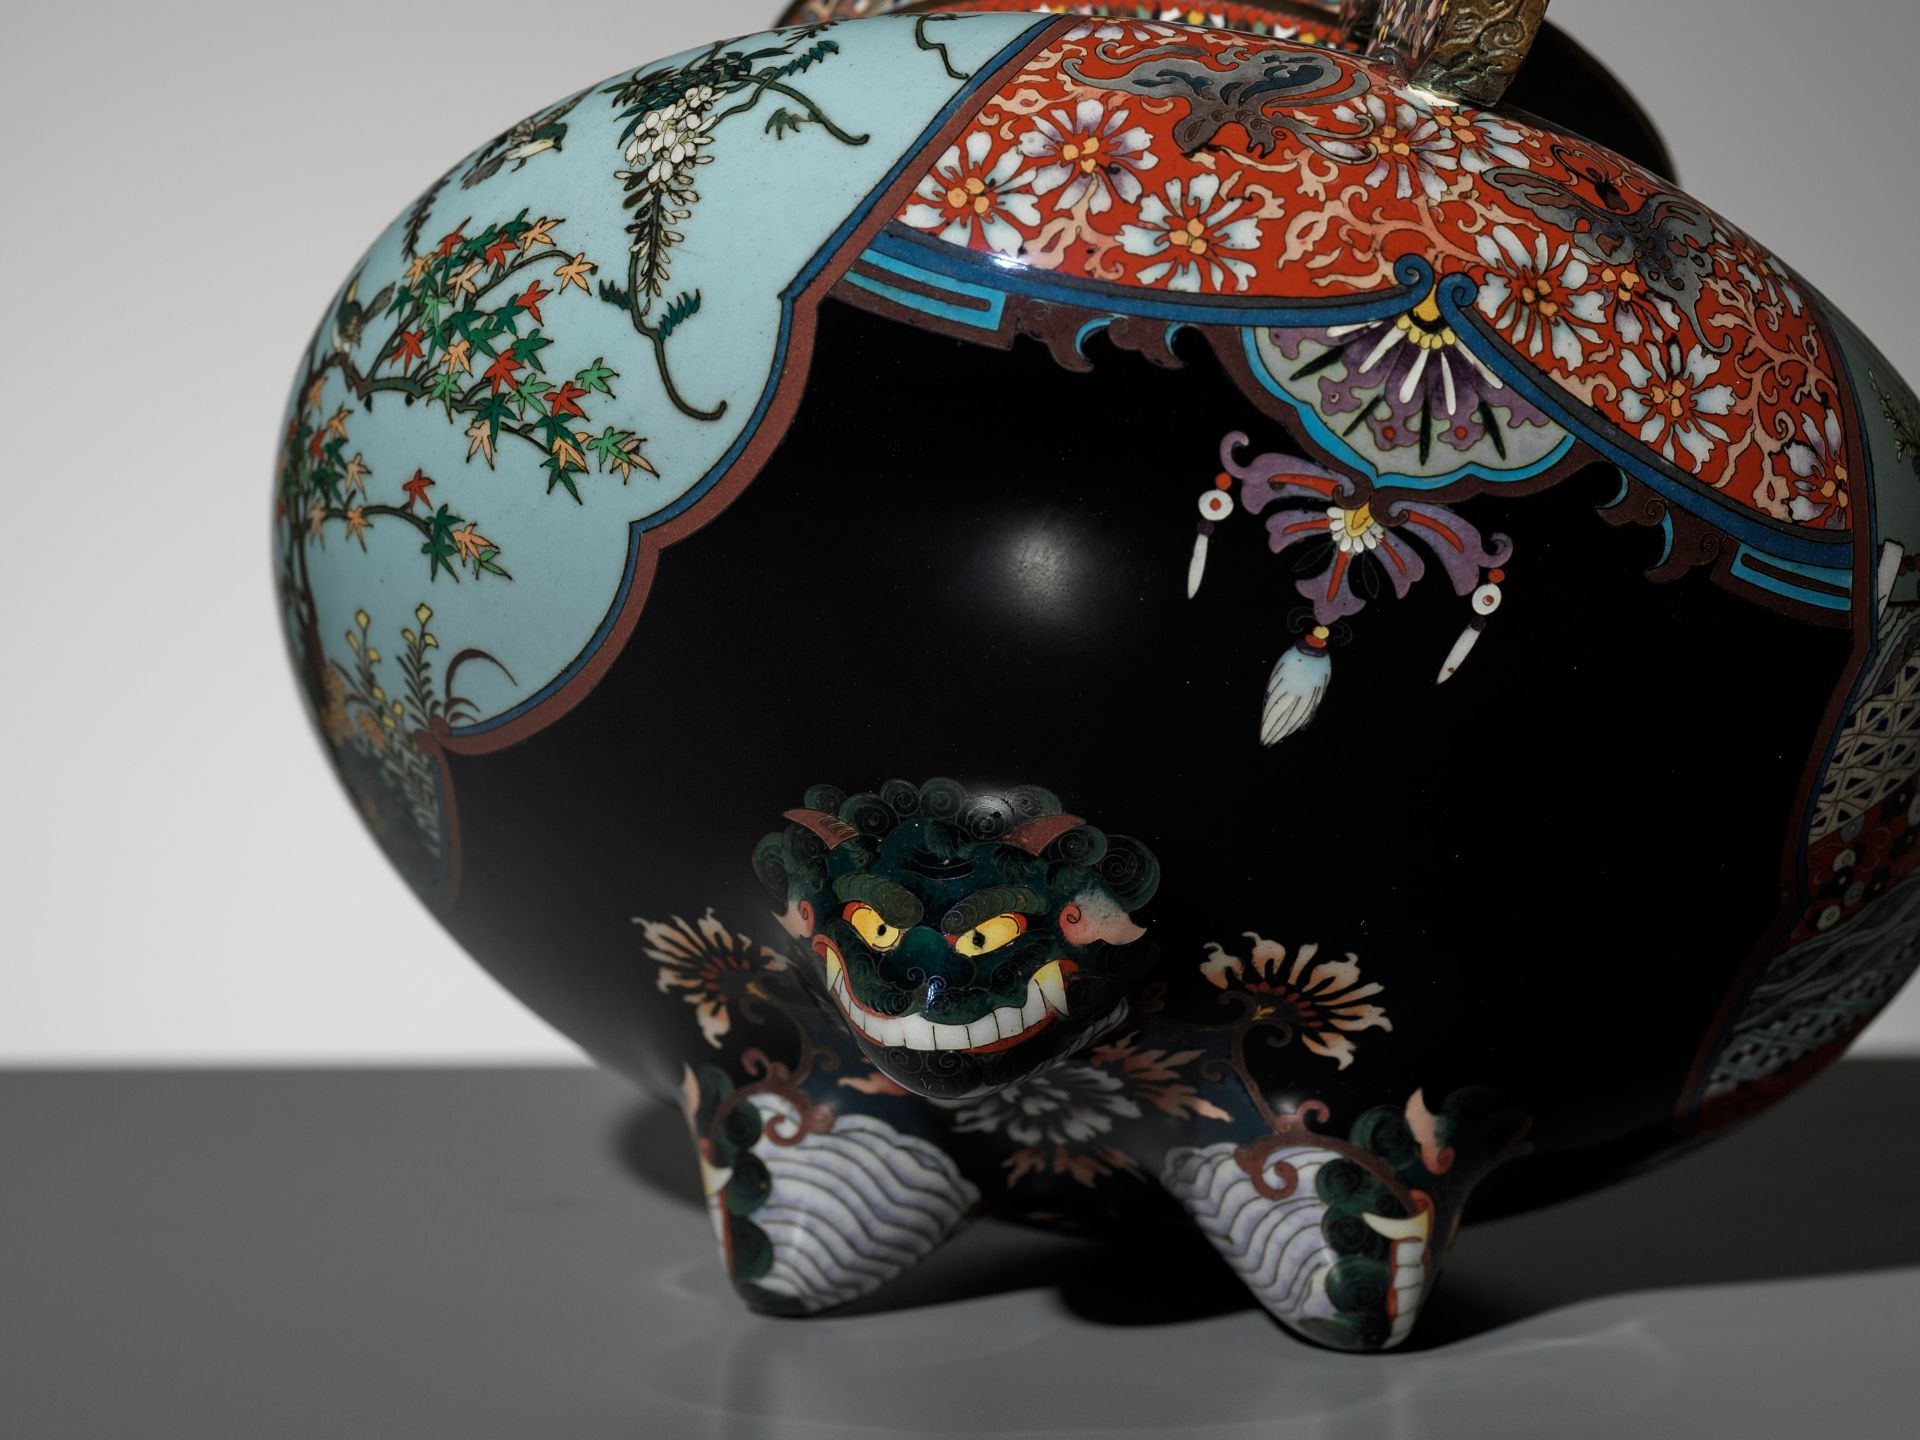 A FINE CLOISONNÃ‰ KORO (INCENSE BURNER) AND COVER, STYLE OF HAYASHI KODENJI - Image 2 of 11